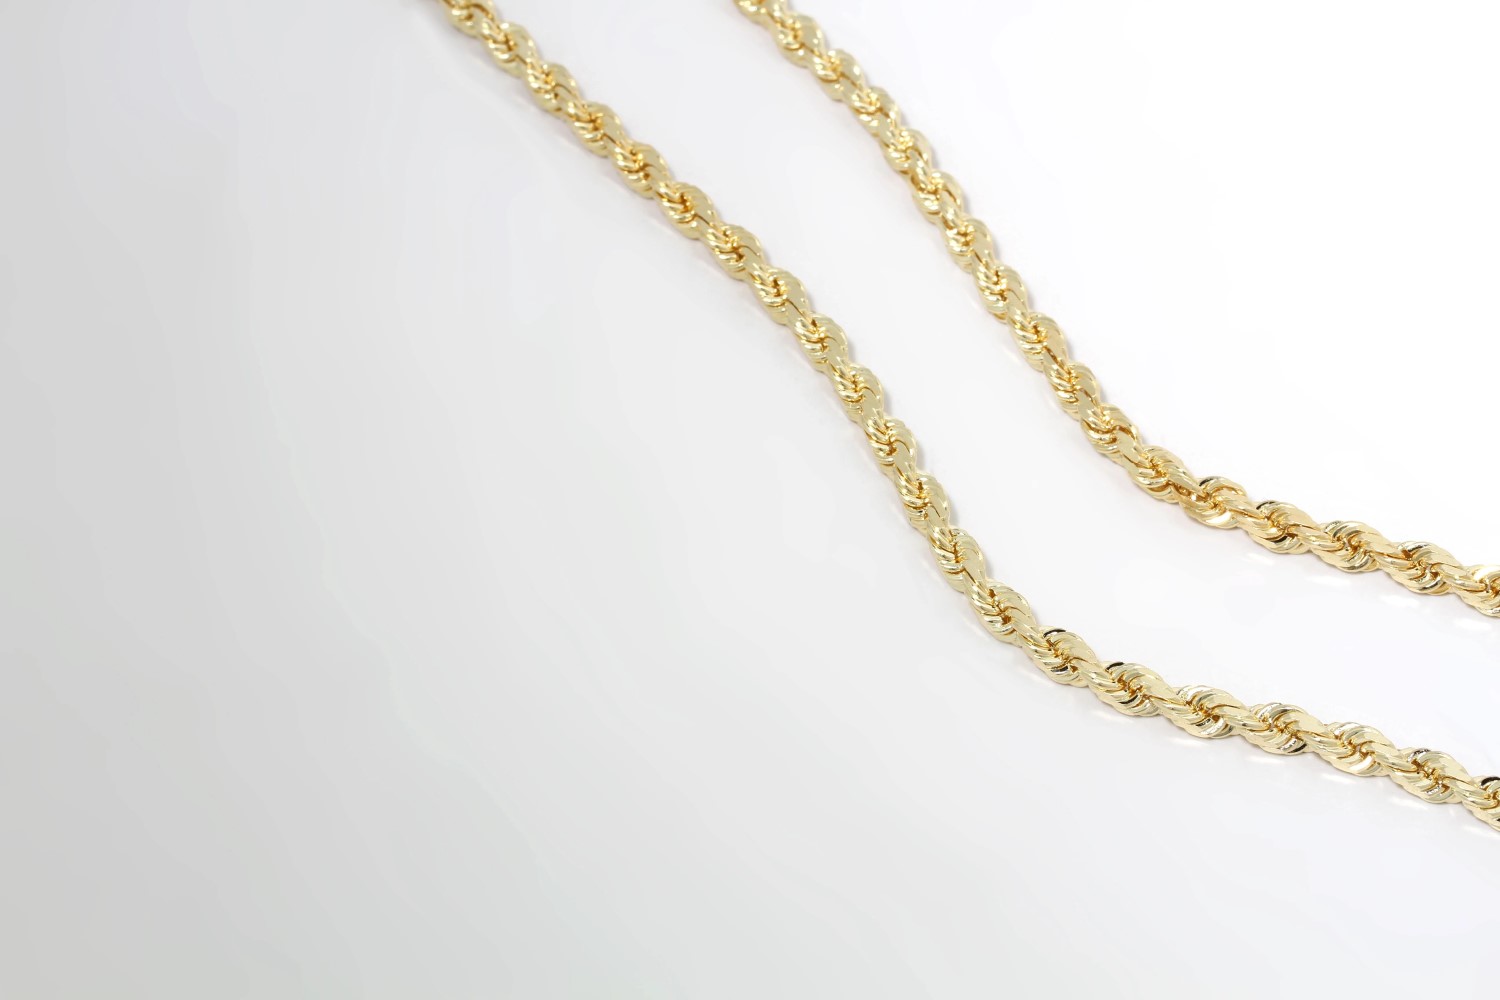 Two gold rope chains on display above a white backdrop. They are thin and intricate.